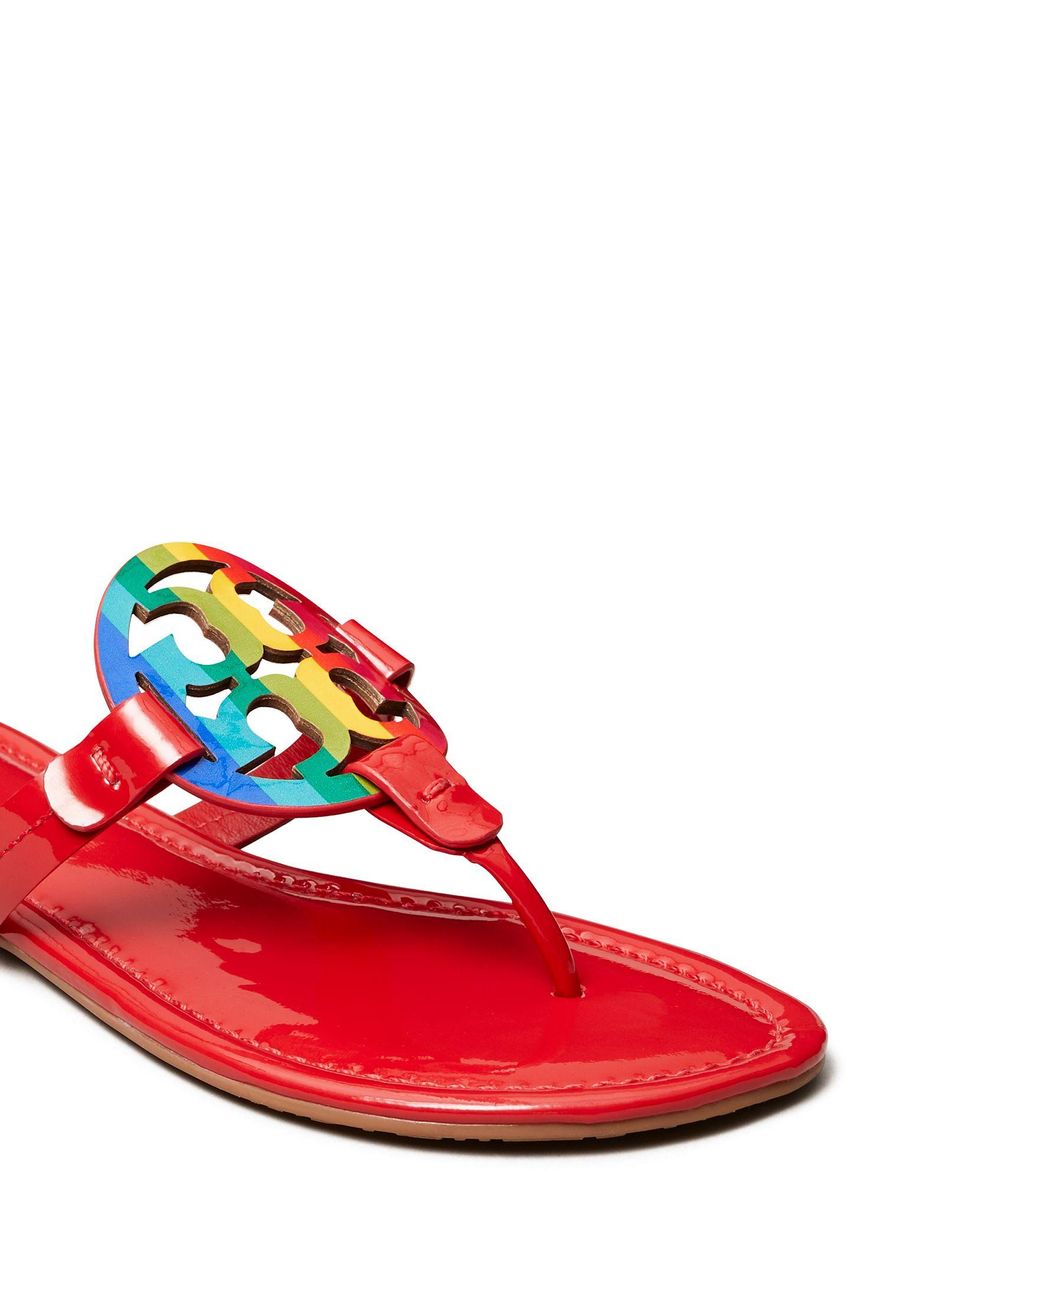 Tory Burch Miller Sandal, Printed Patent Leather in Red | Lyst Canada